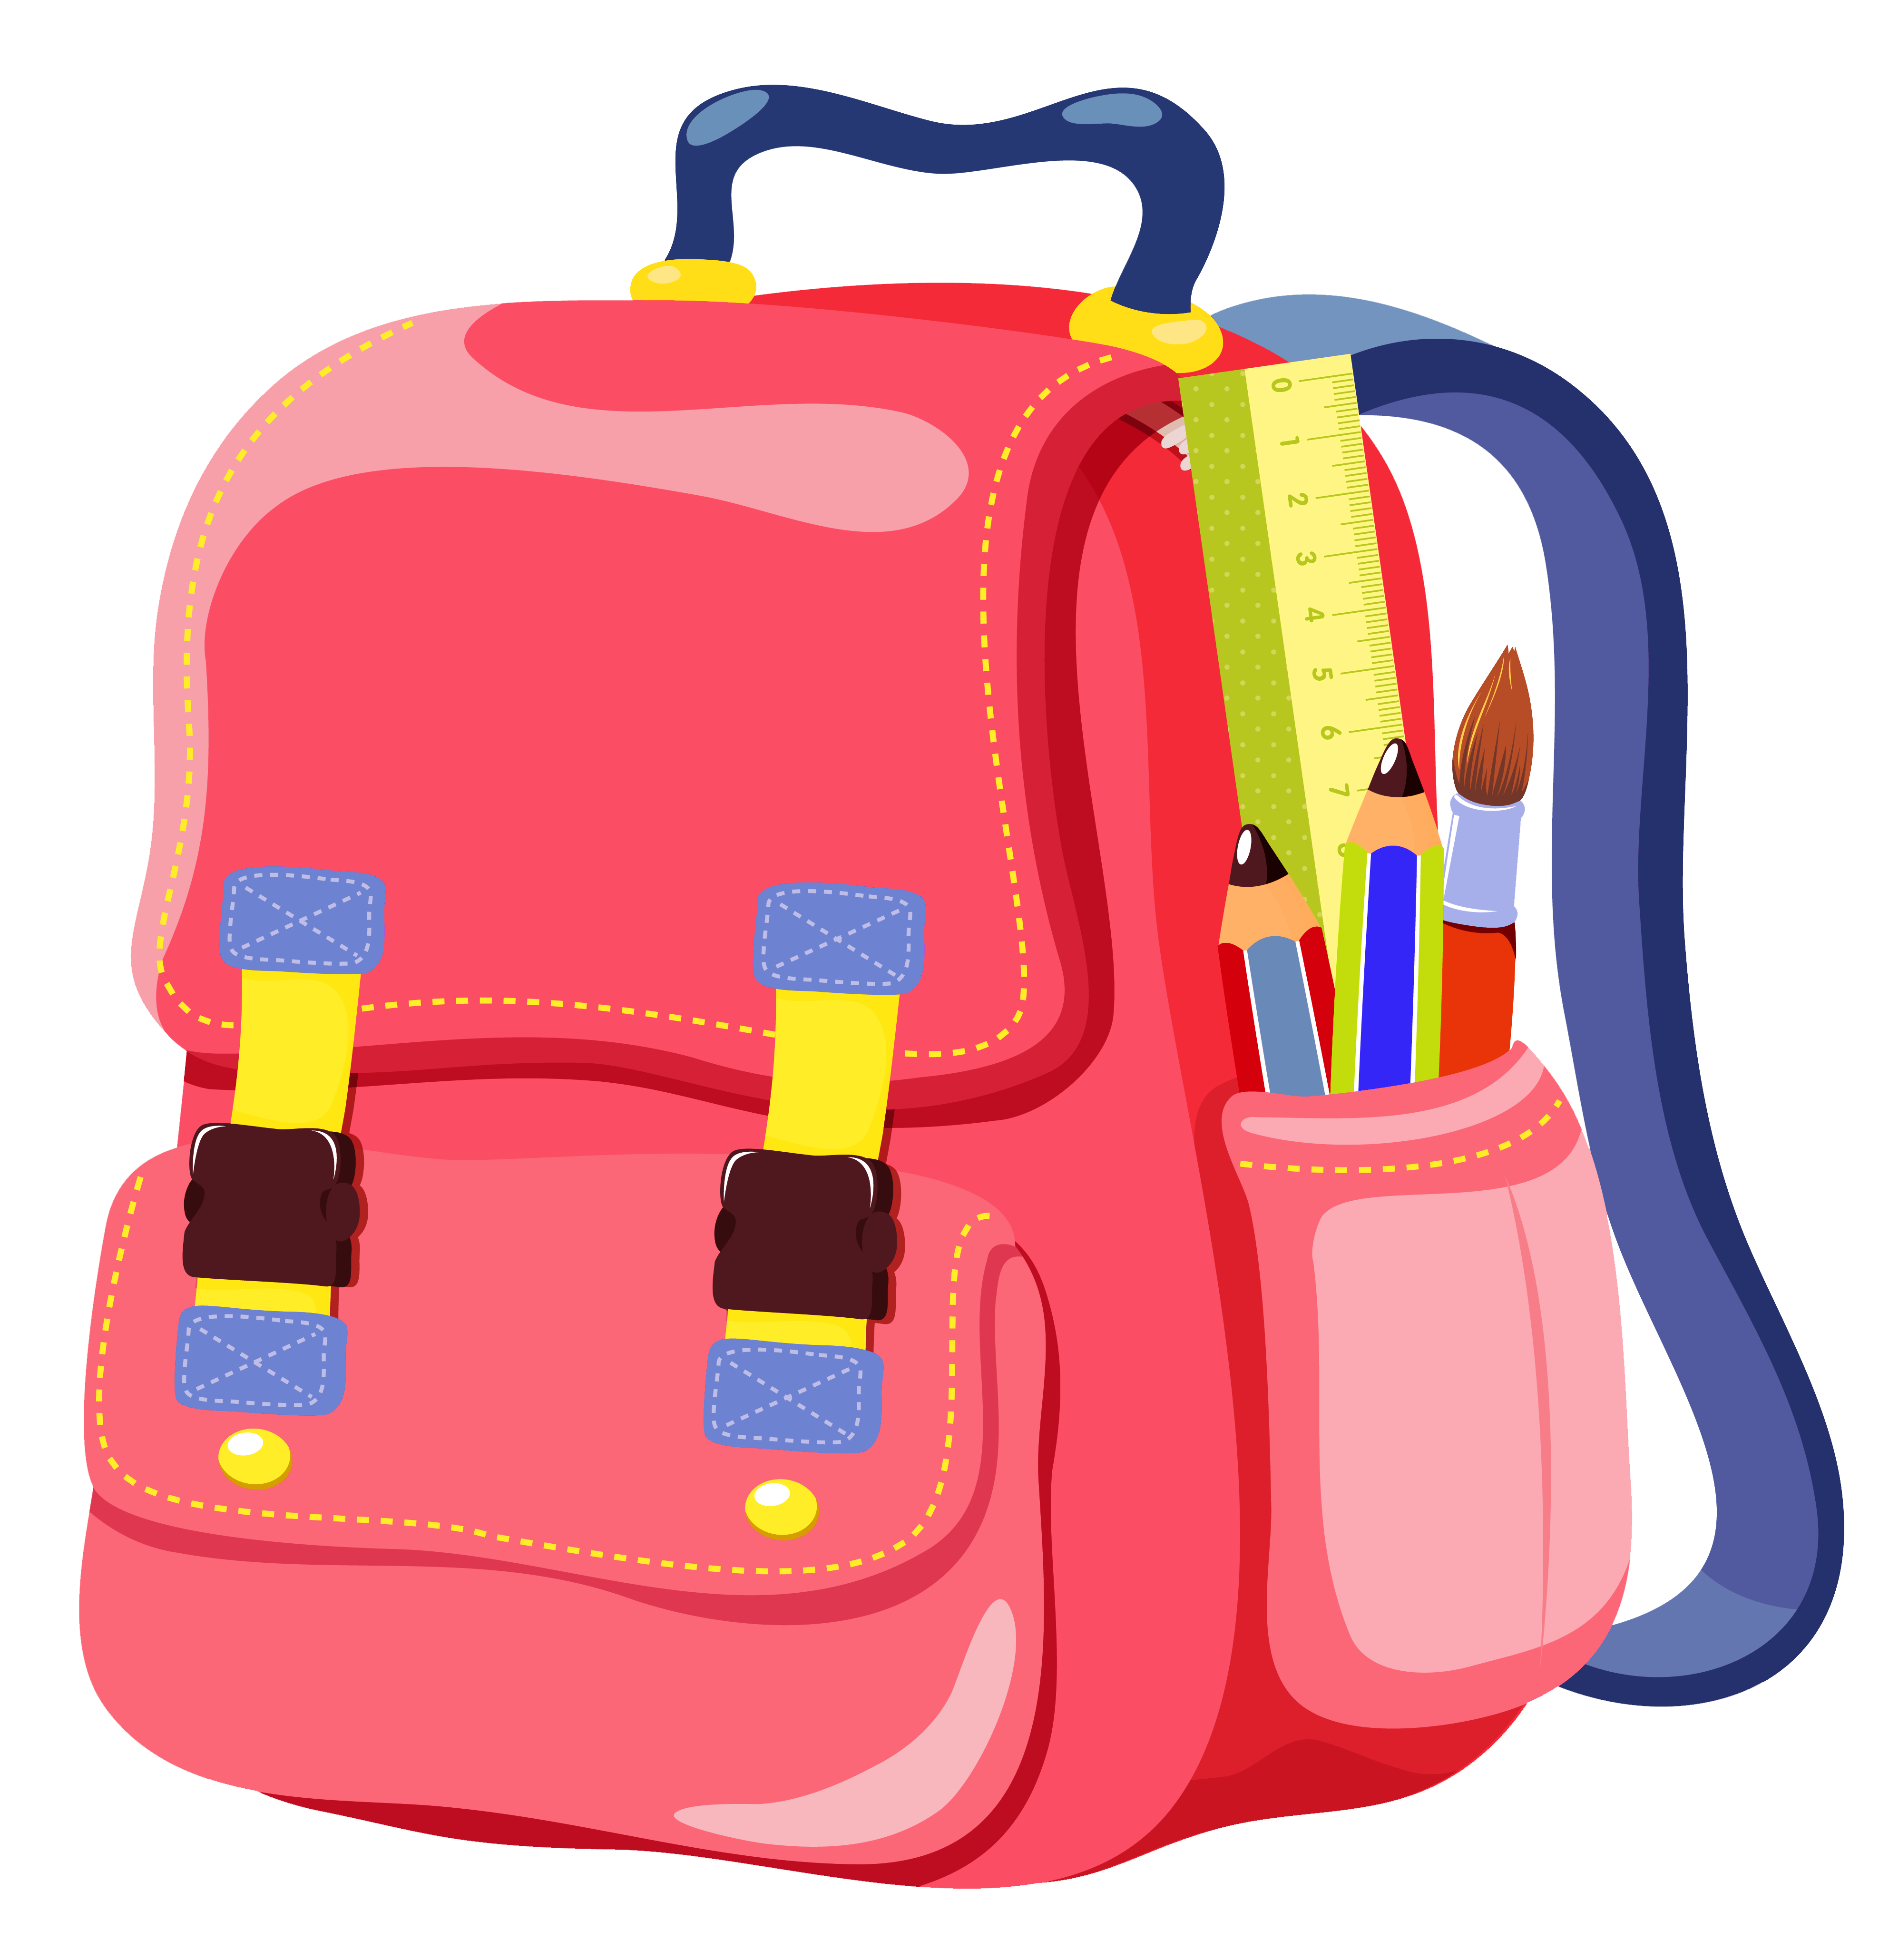 School cliparts and others. Folder clipart backpack